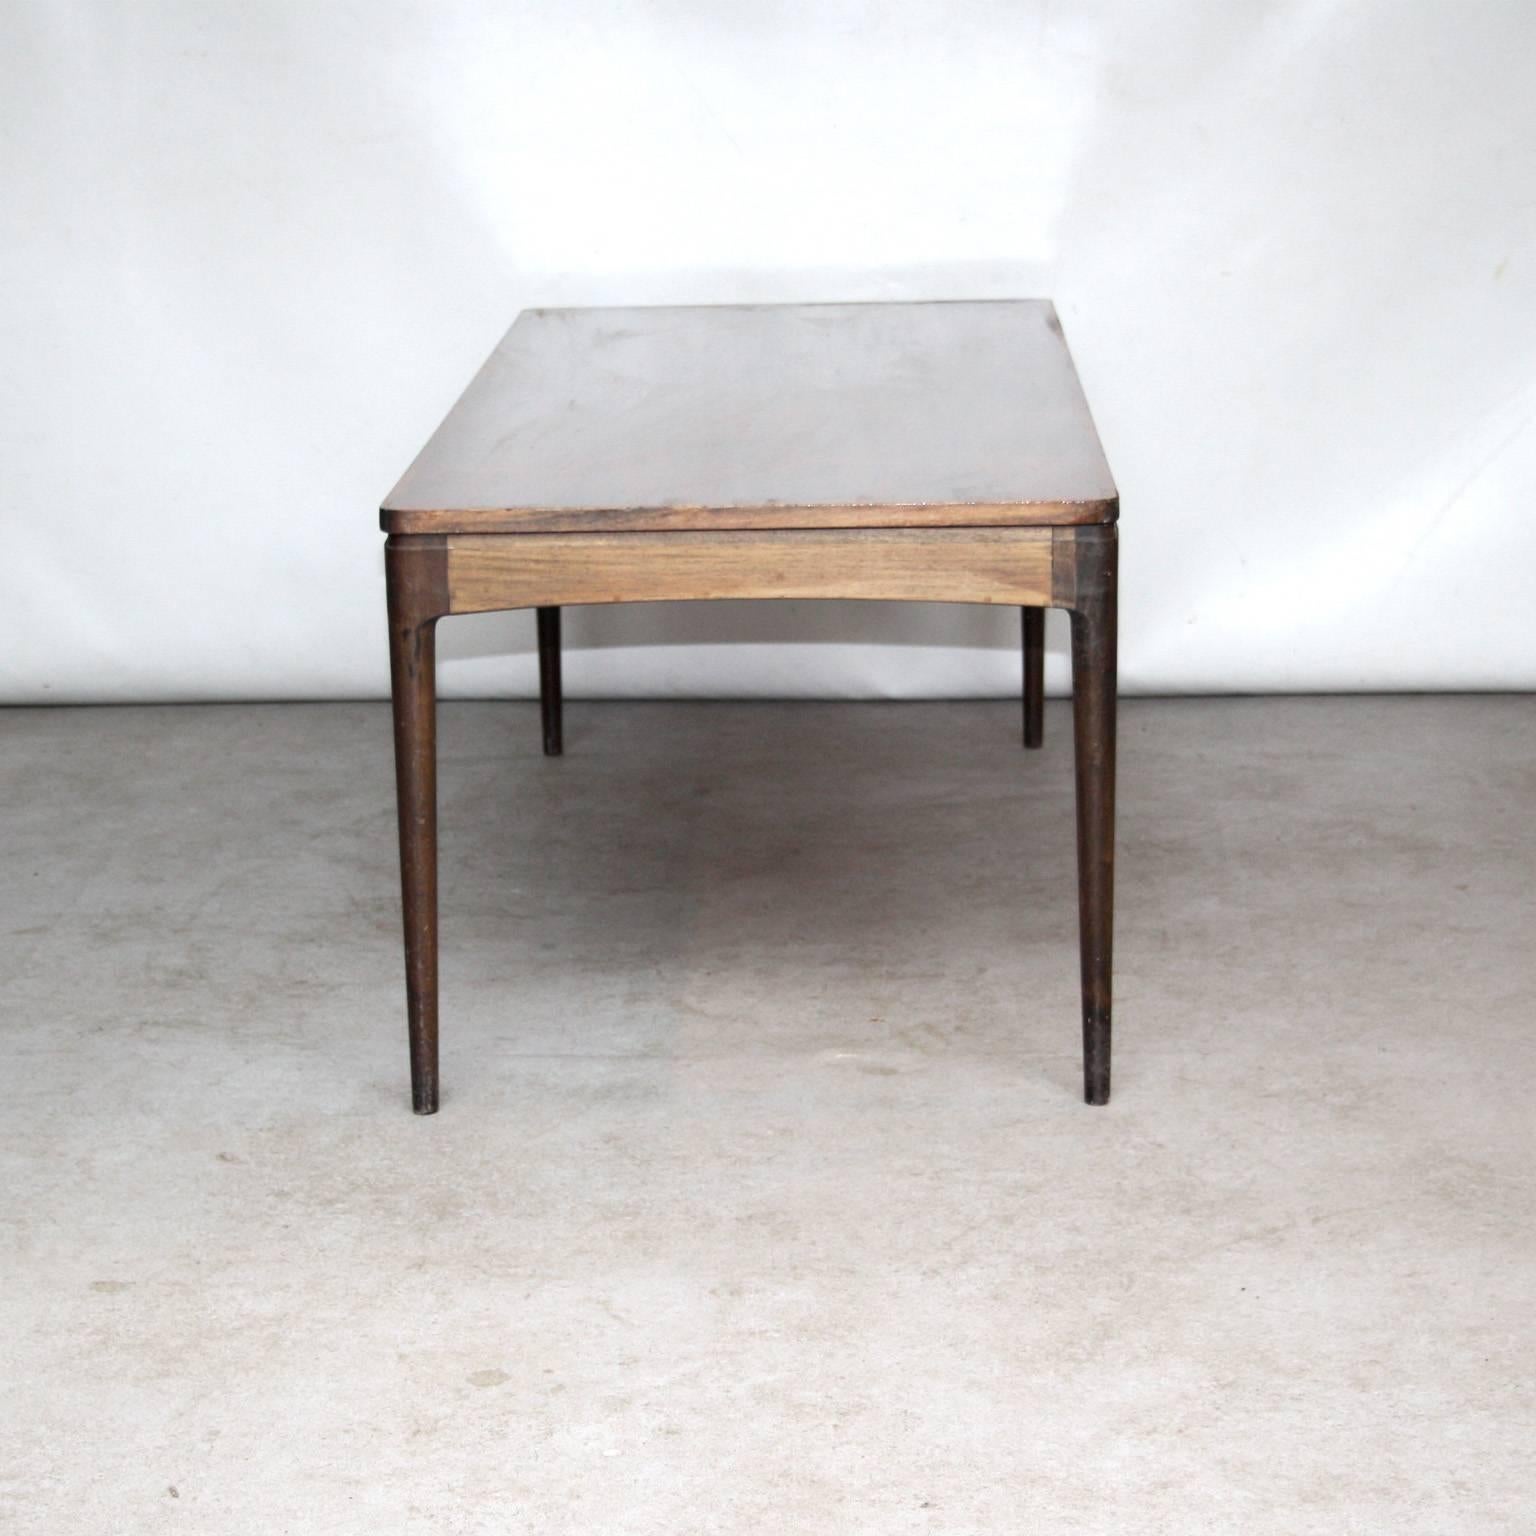 Rosewood Danish coffee table by Christian Linneberg.

Coffee table is in good condition.